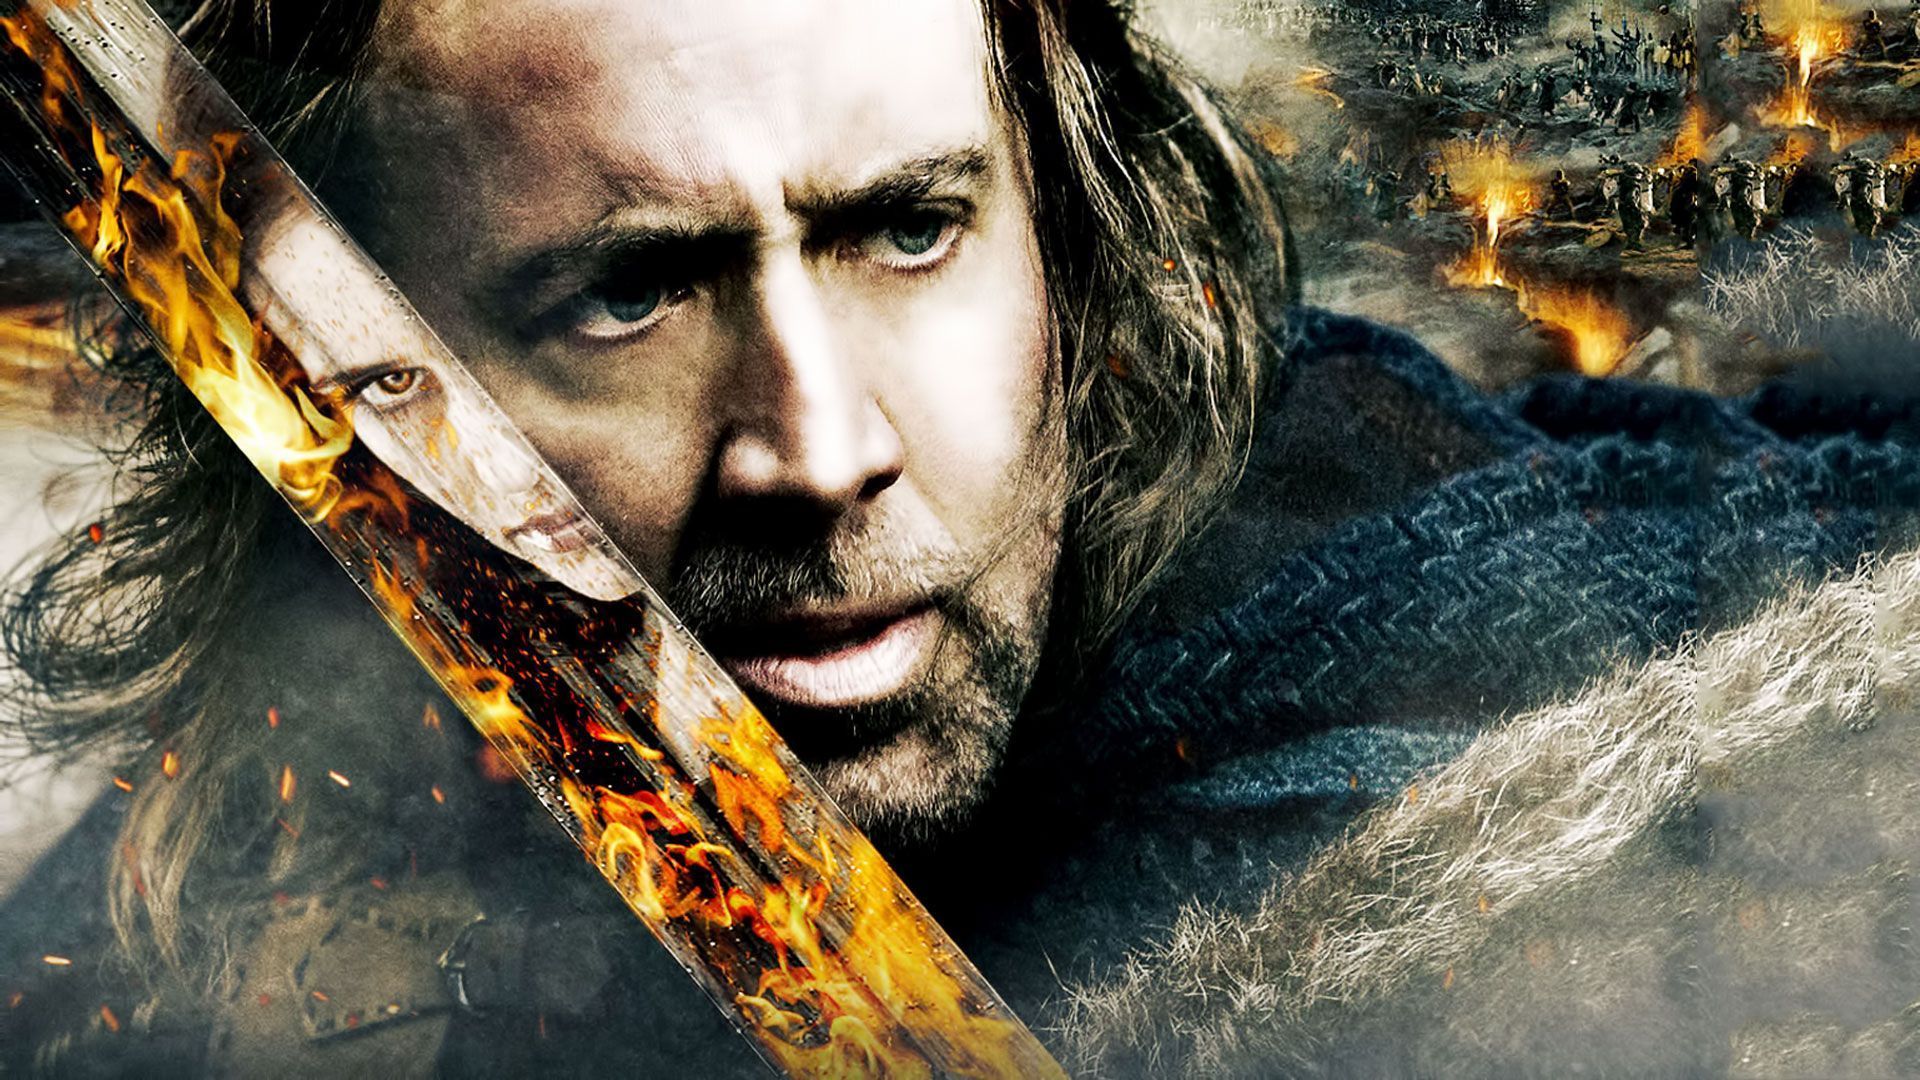 Nicolas Cage Wallpapers, Photos & Images in HD